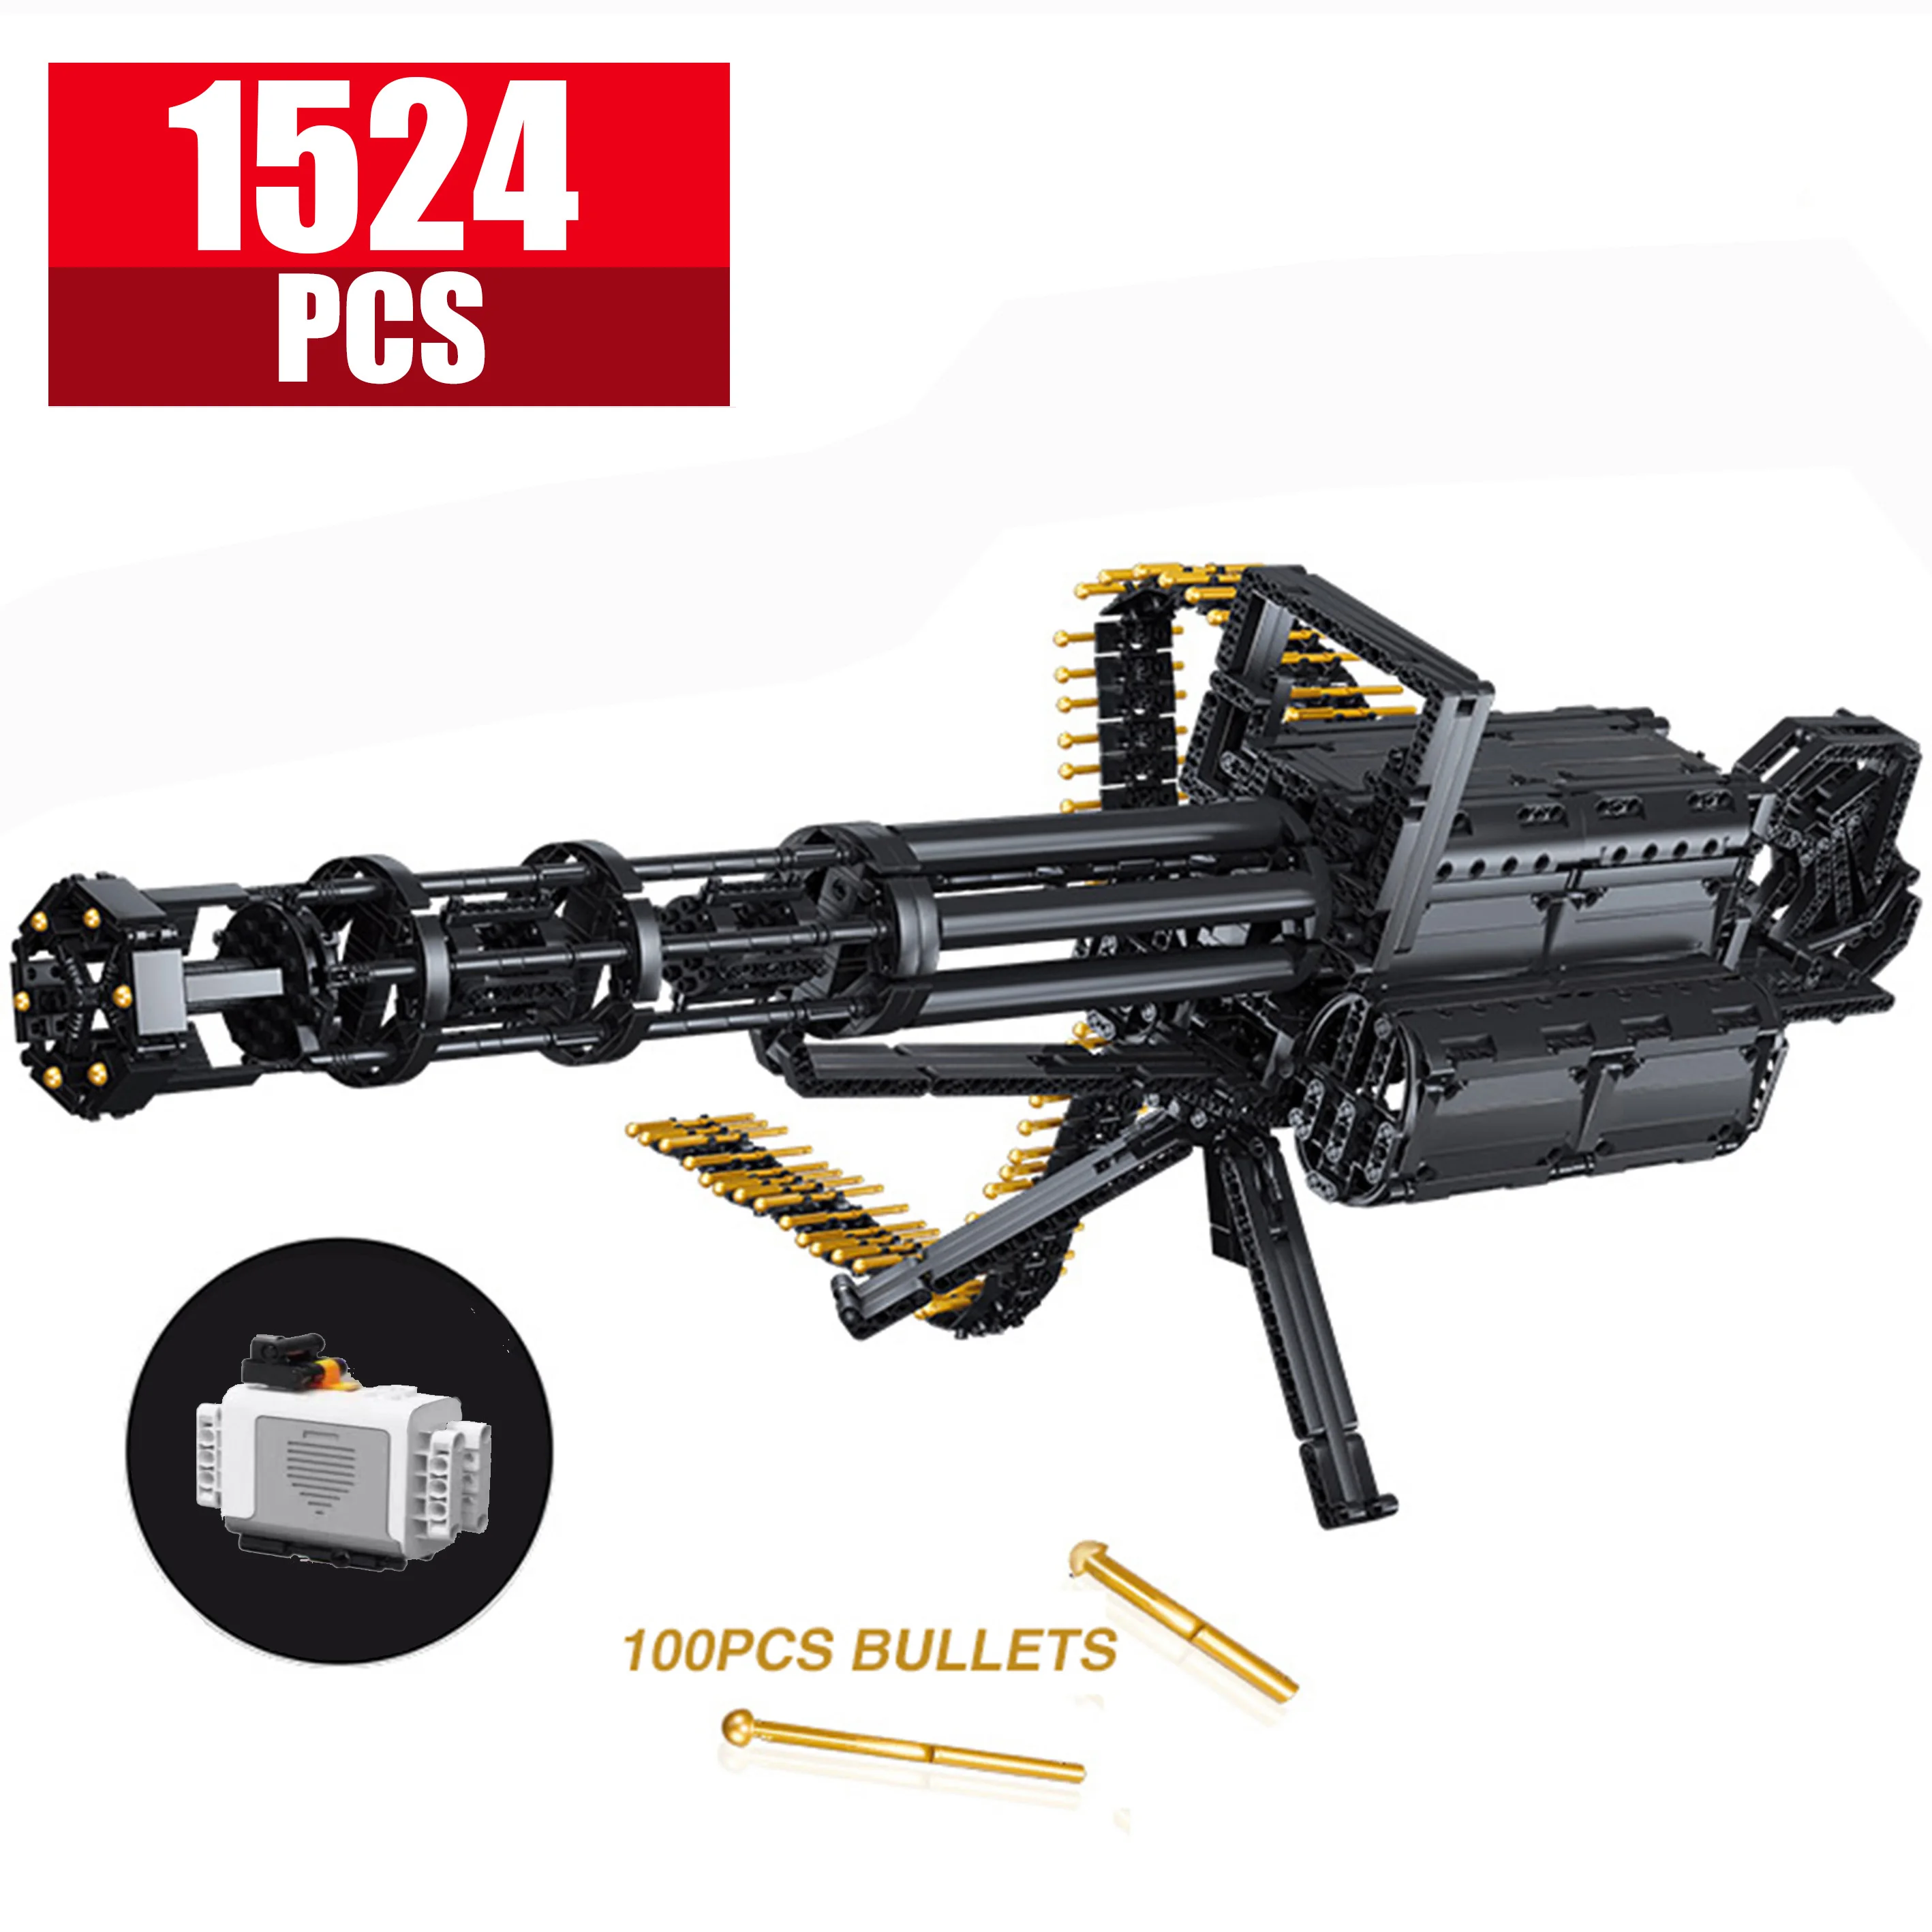 

Military WW2 Technical Electric Gatling Gun Continuous Firing Building Block City Police Weapons Pistol Sniper Rifle Toy Boy